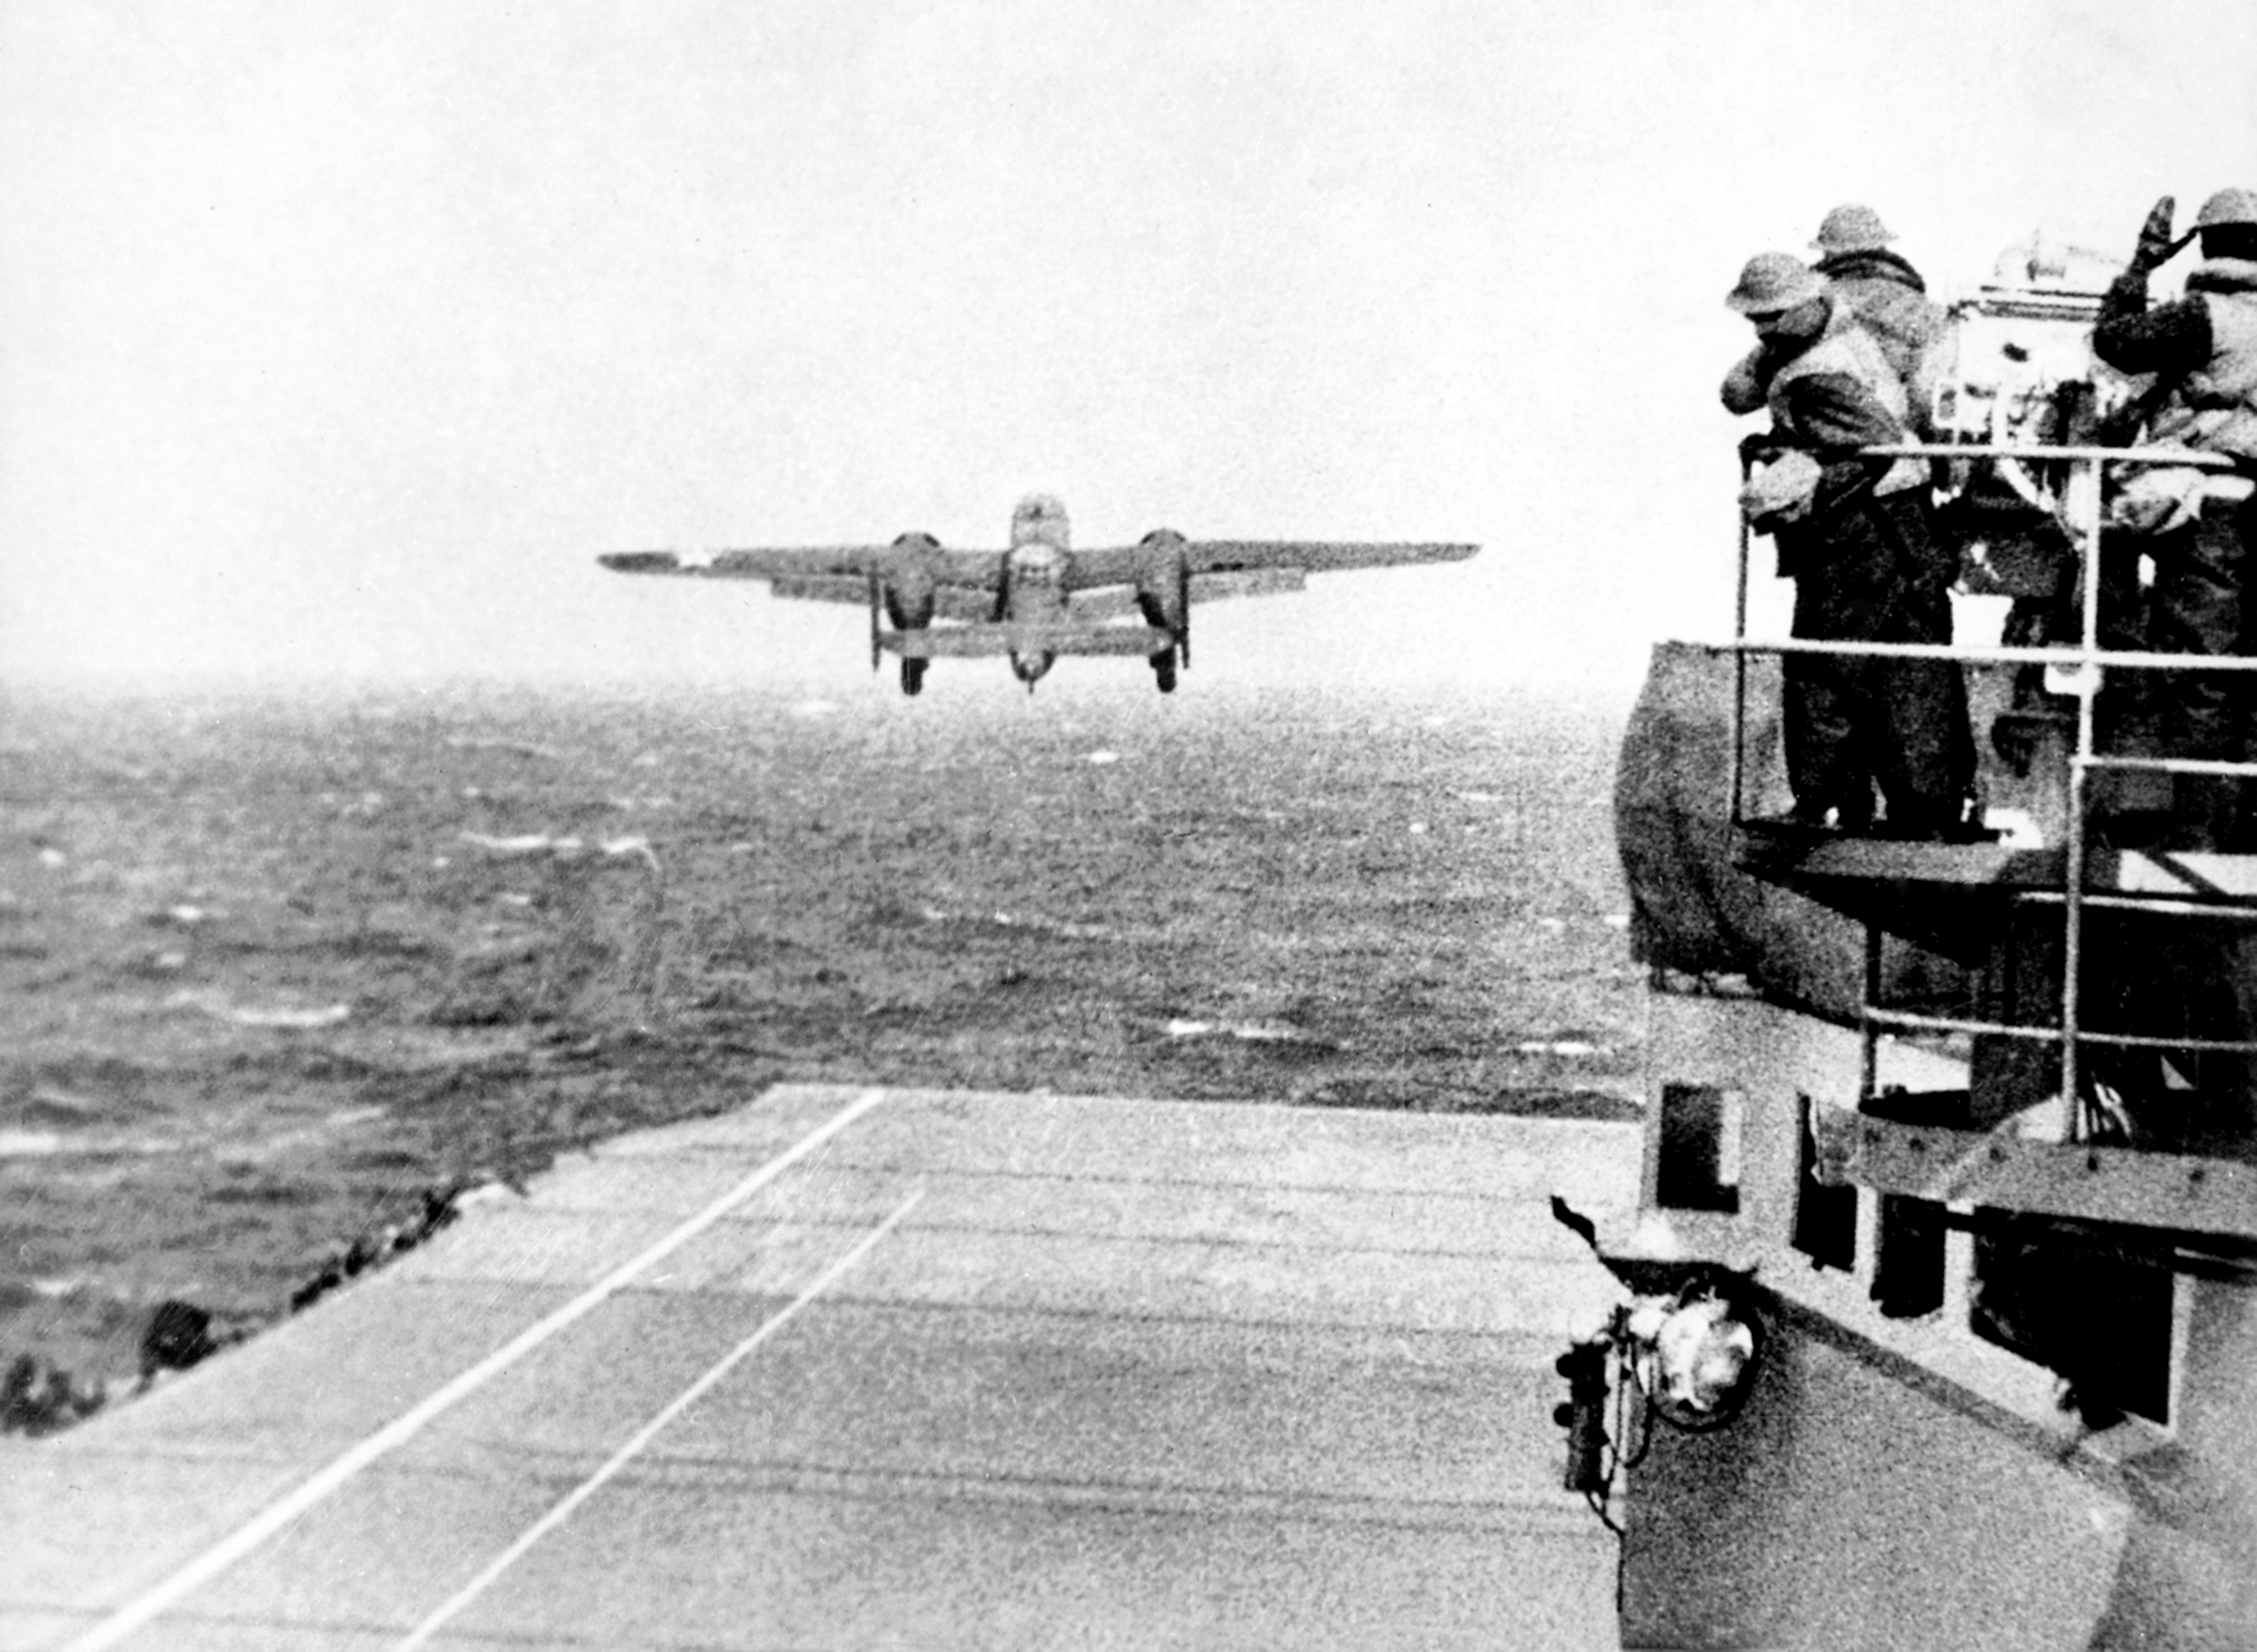 USA/Japan: A USAAF B25B Mitchell Bomber B-25 taking off from the USS Hornet for the ‘Doolittle Raid’ on Tokyo, 18 April 1942